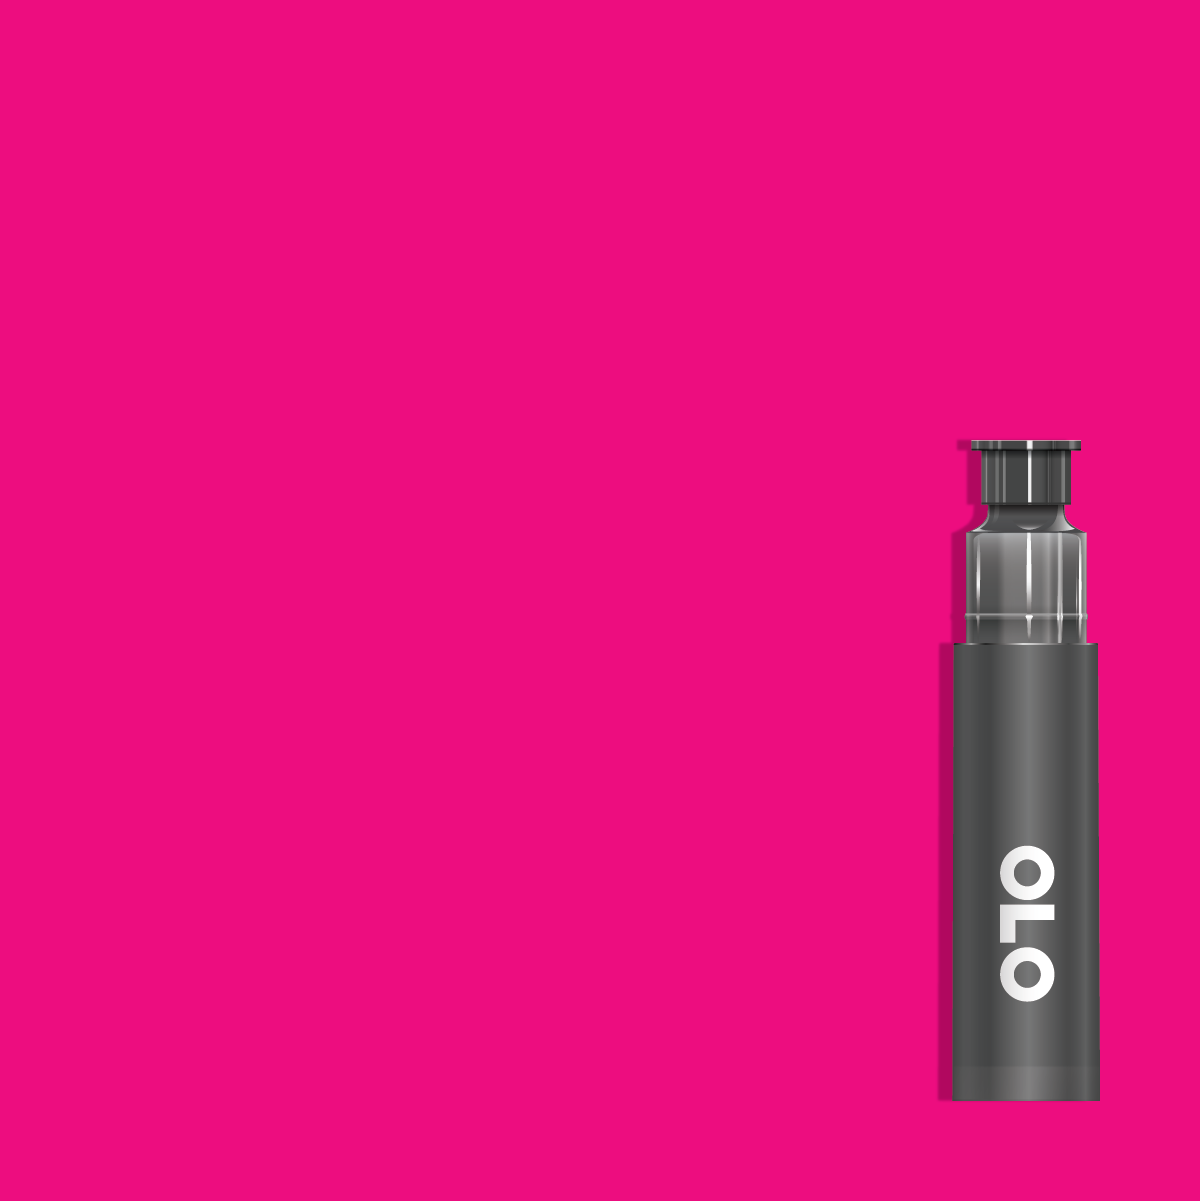 OLO RV0.4 Hot Pink Replacement Cartridge